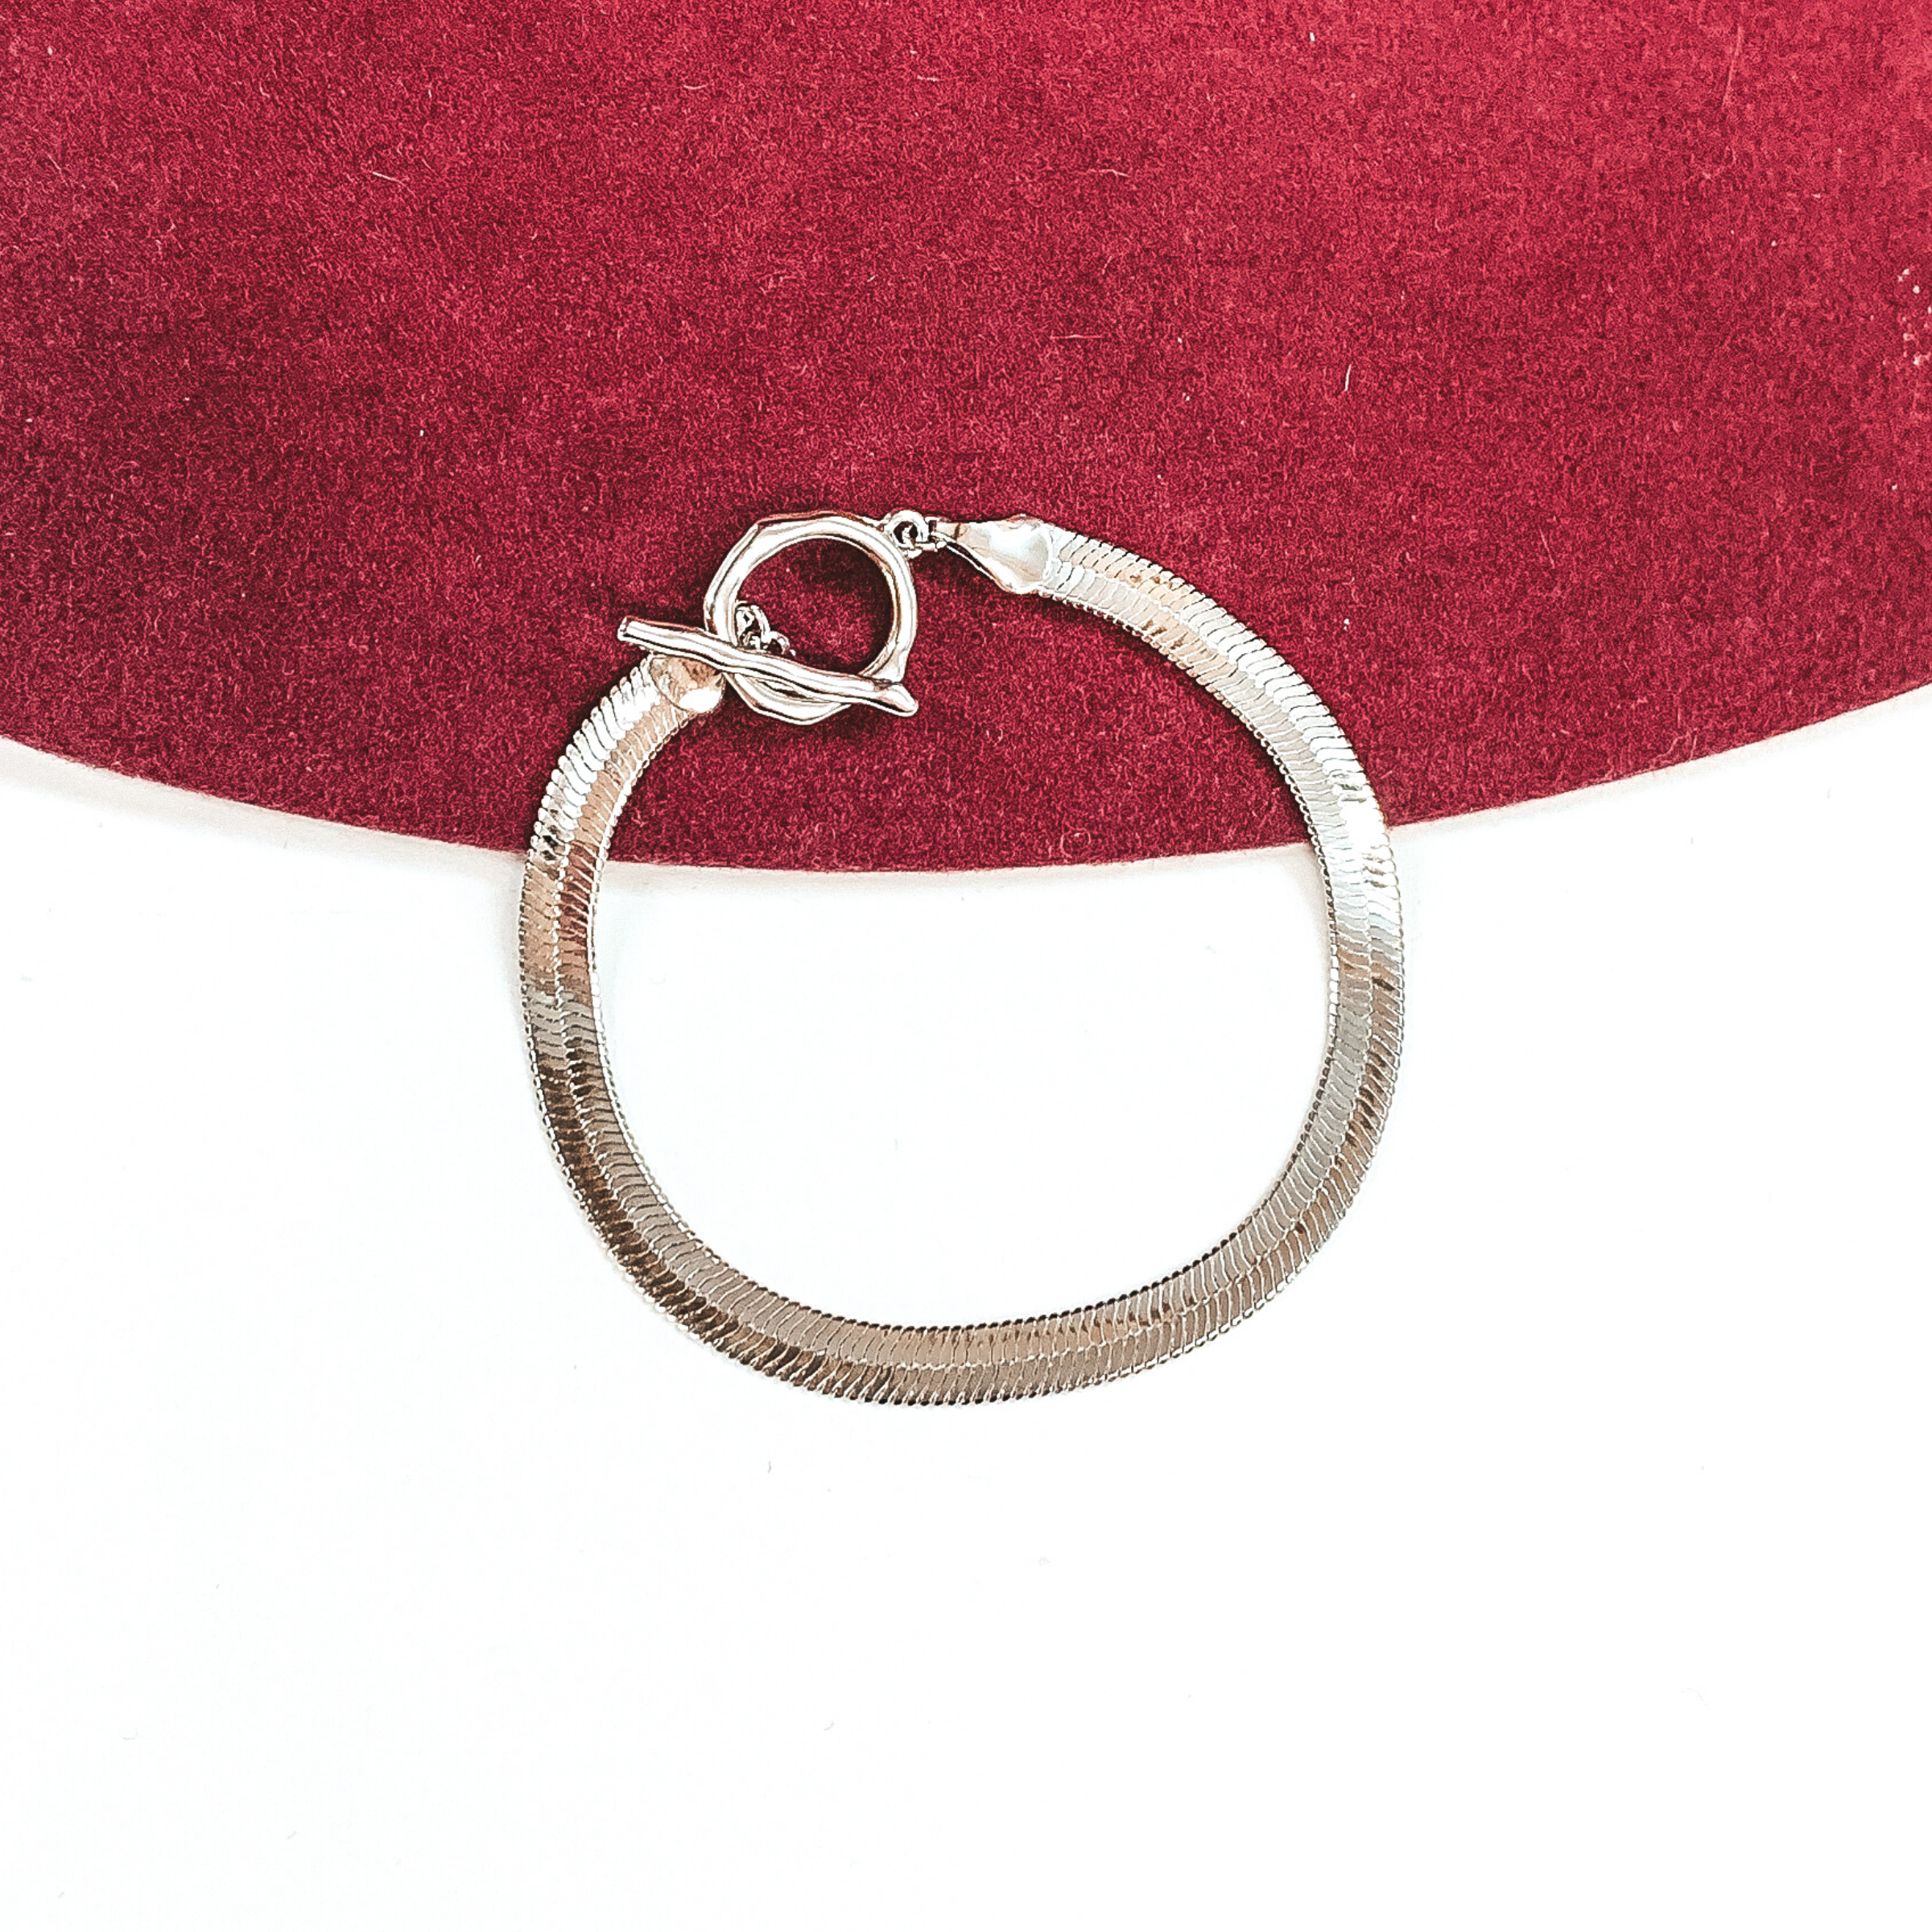 Silver herringbone bracelet that closes with a toggle clasp. This bracelet is pictured on a white and red background. 